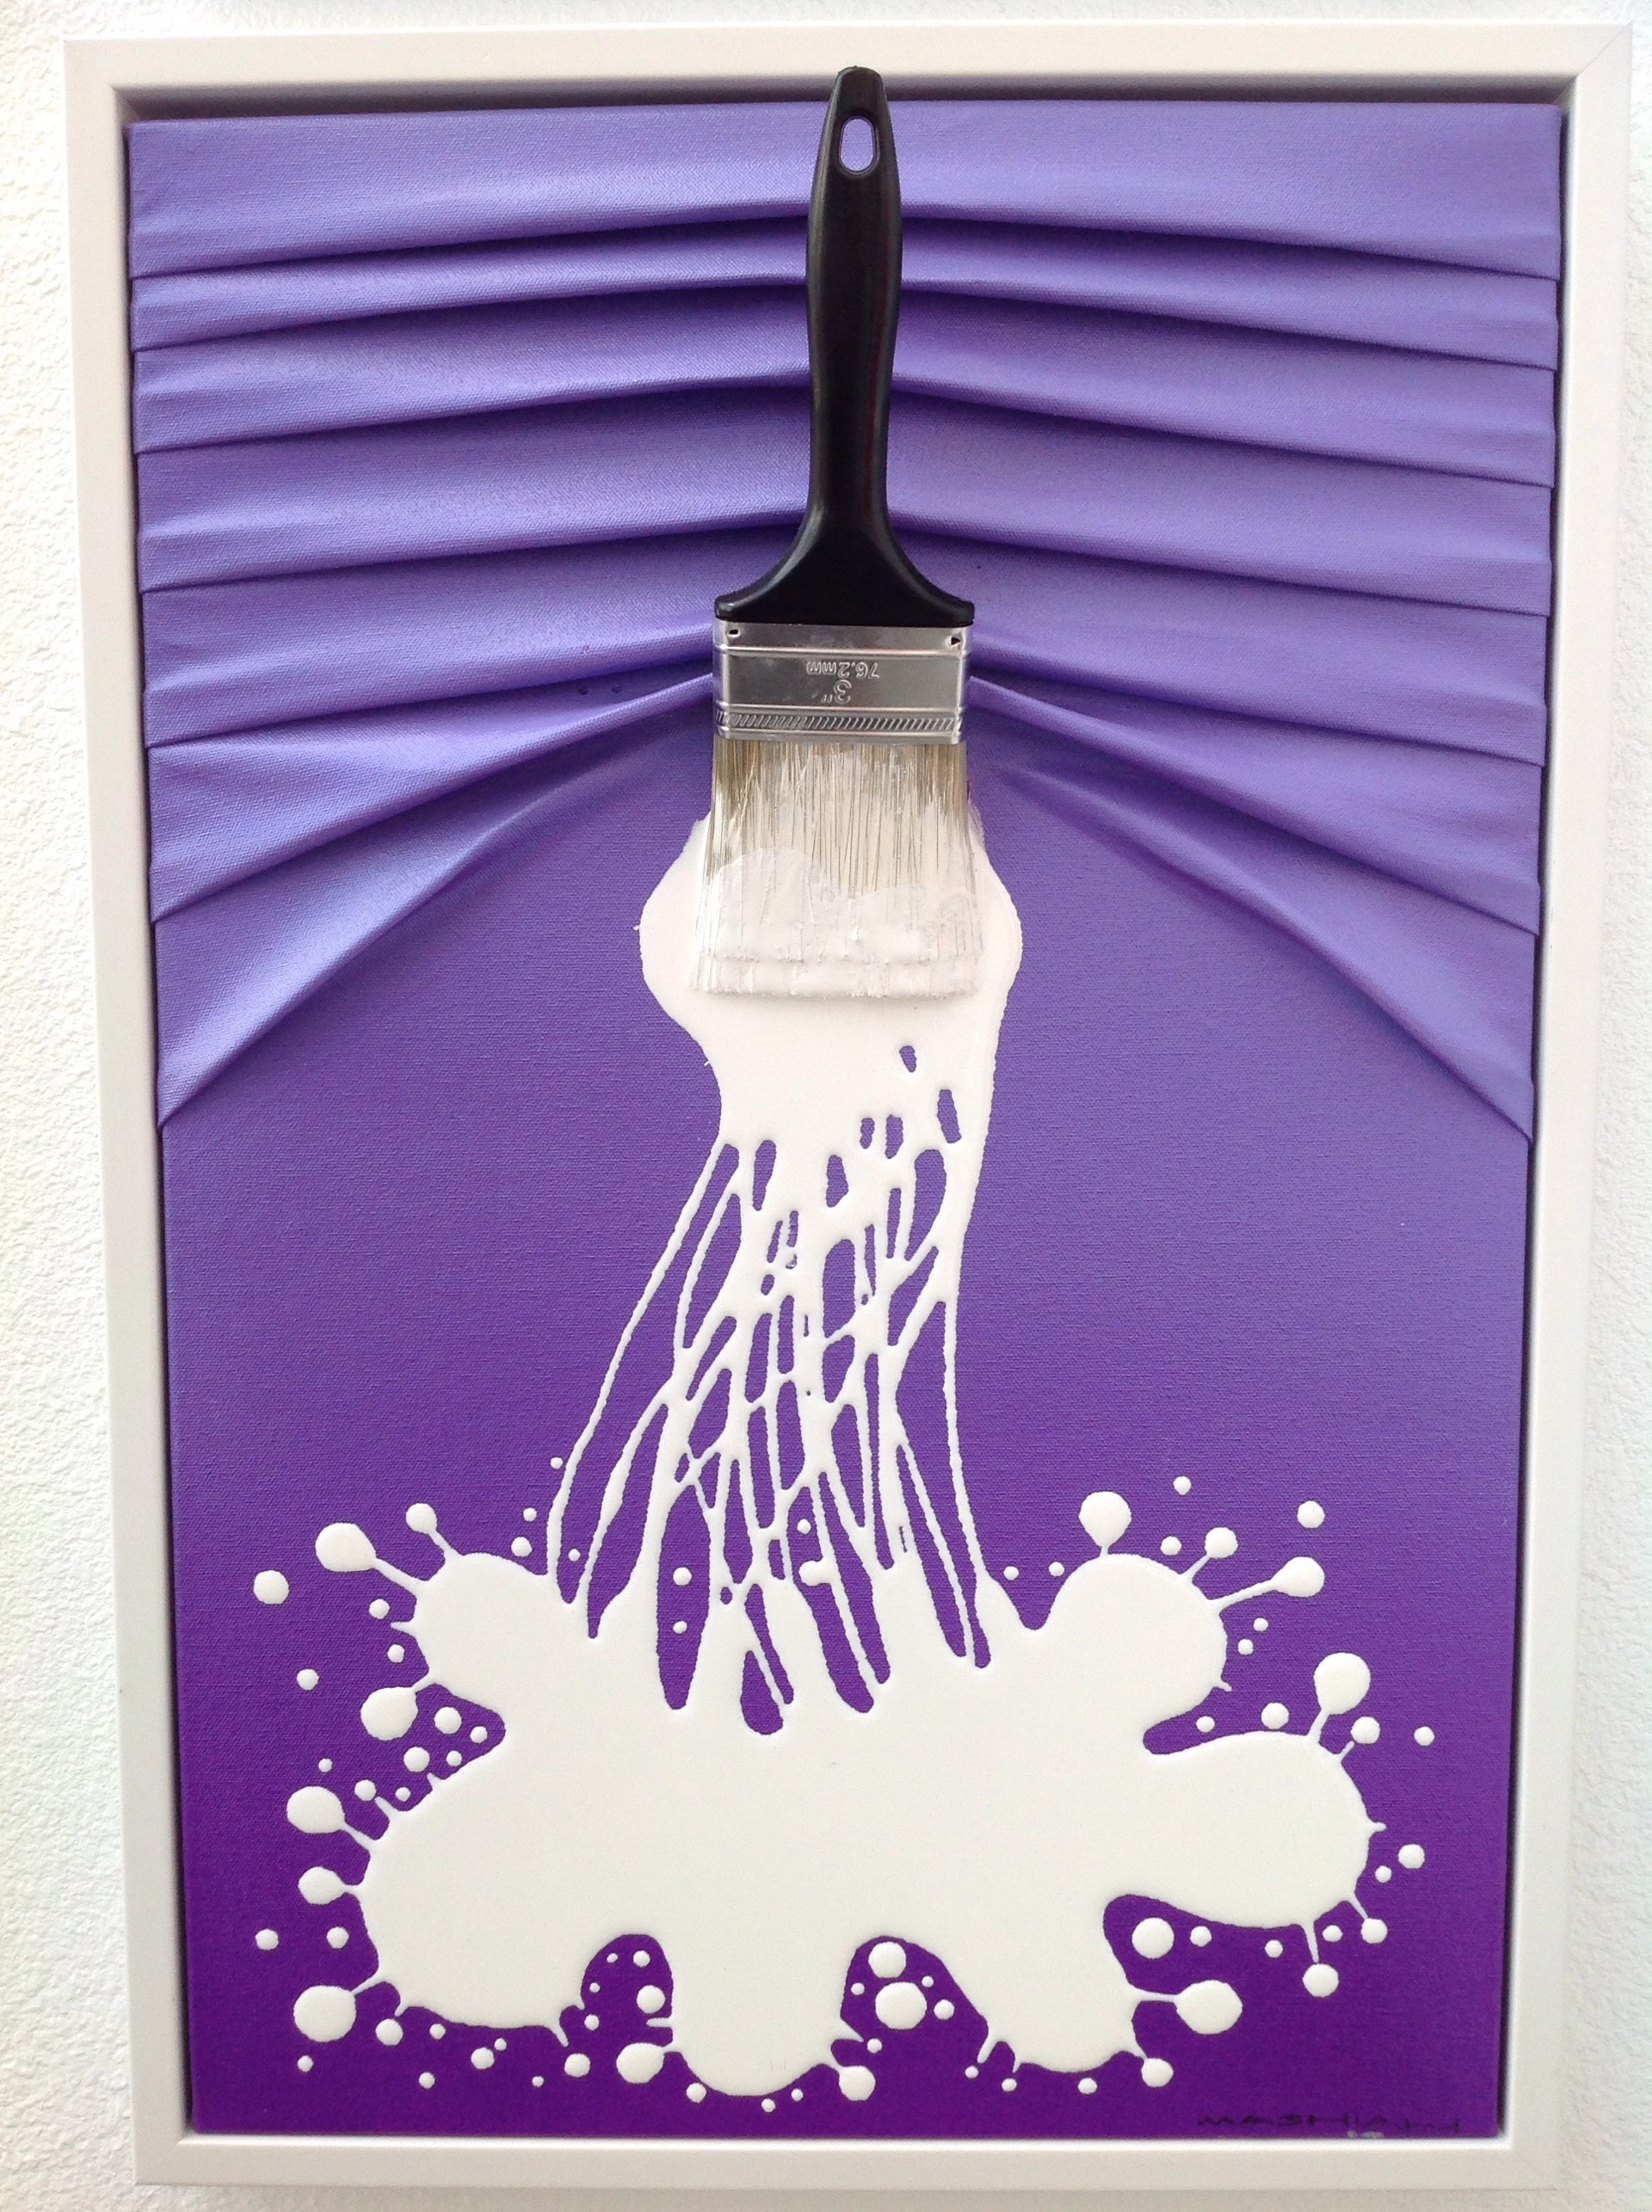 "Lets Paint" Small White on Dk. Purple/Lt.Purple ombre by Brushes and Rollers "Let's Paint" by Efi Mashiah